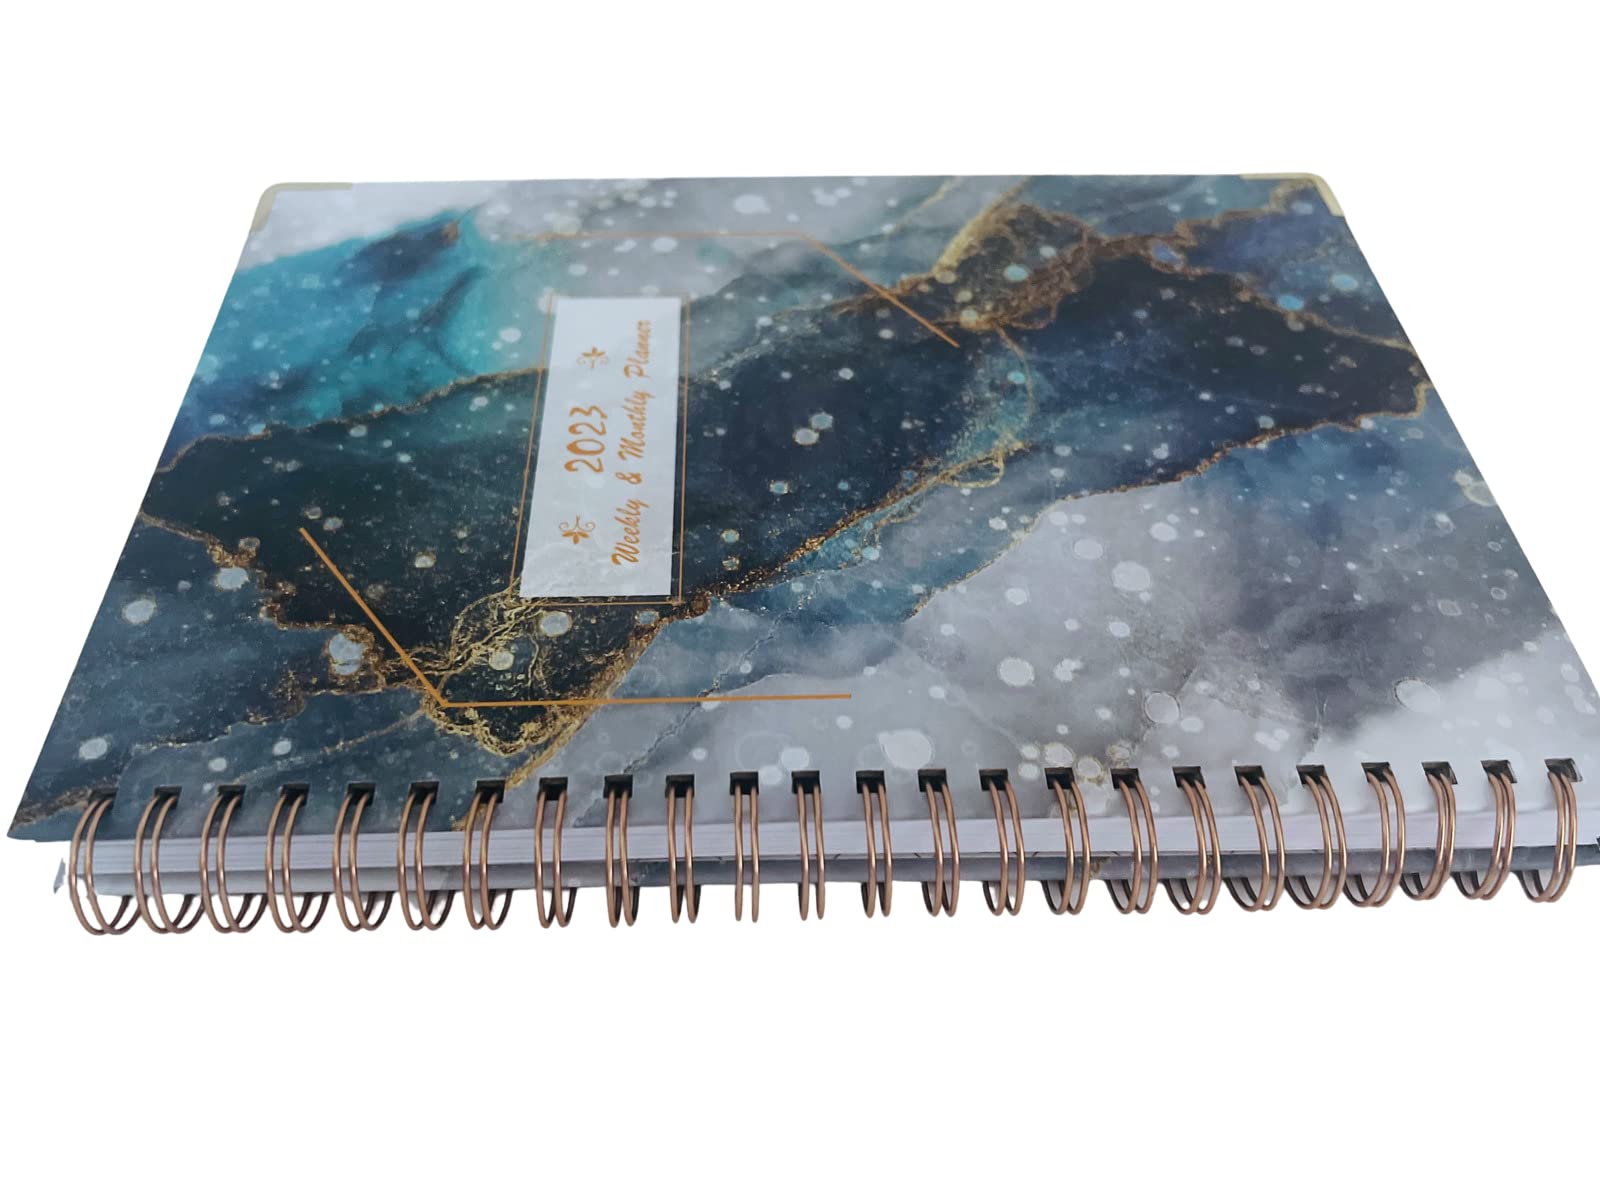 2023 Planner - Weekly & Monthly Planner 2023, January 2023 - December 2023, 8.4”x 6.1”, Planner 2023 with Gray Marble Cover